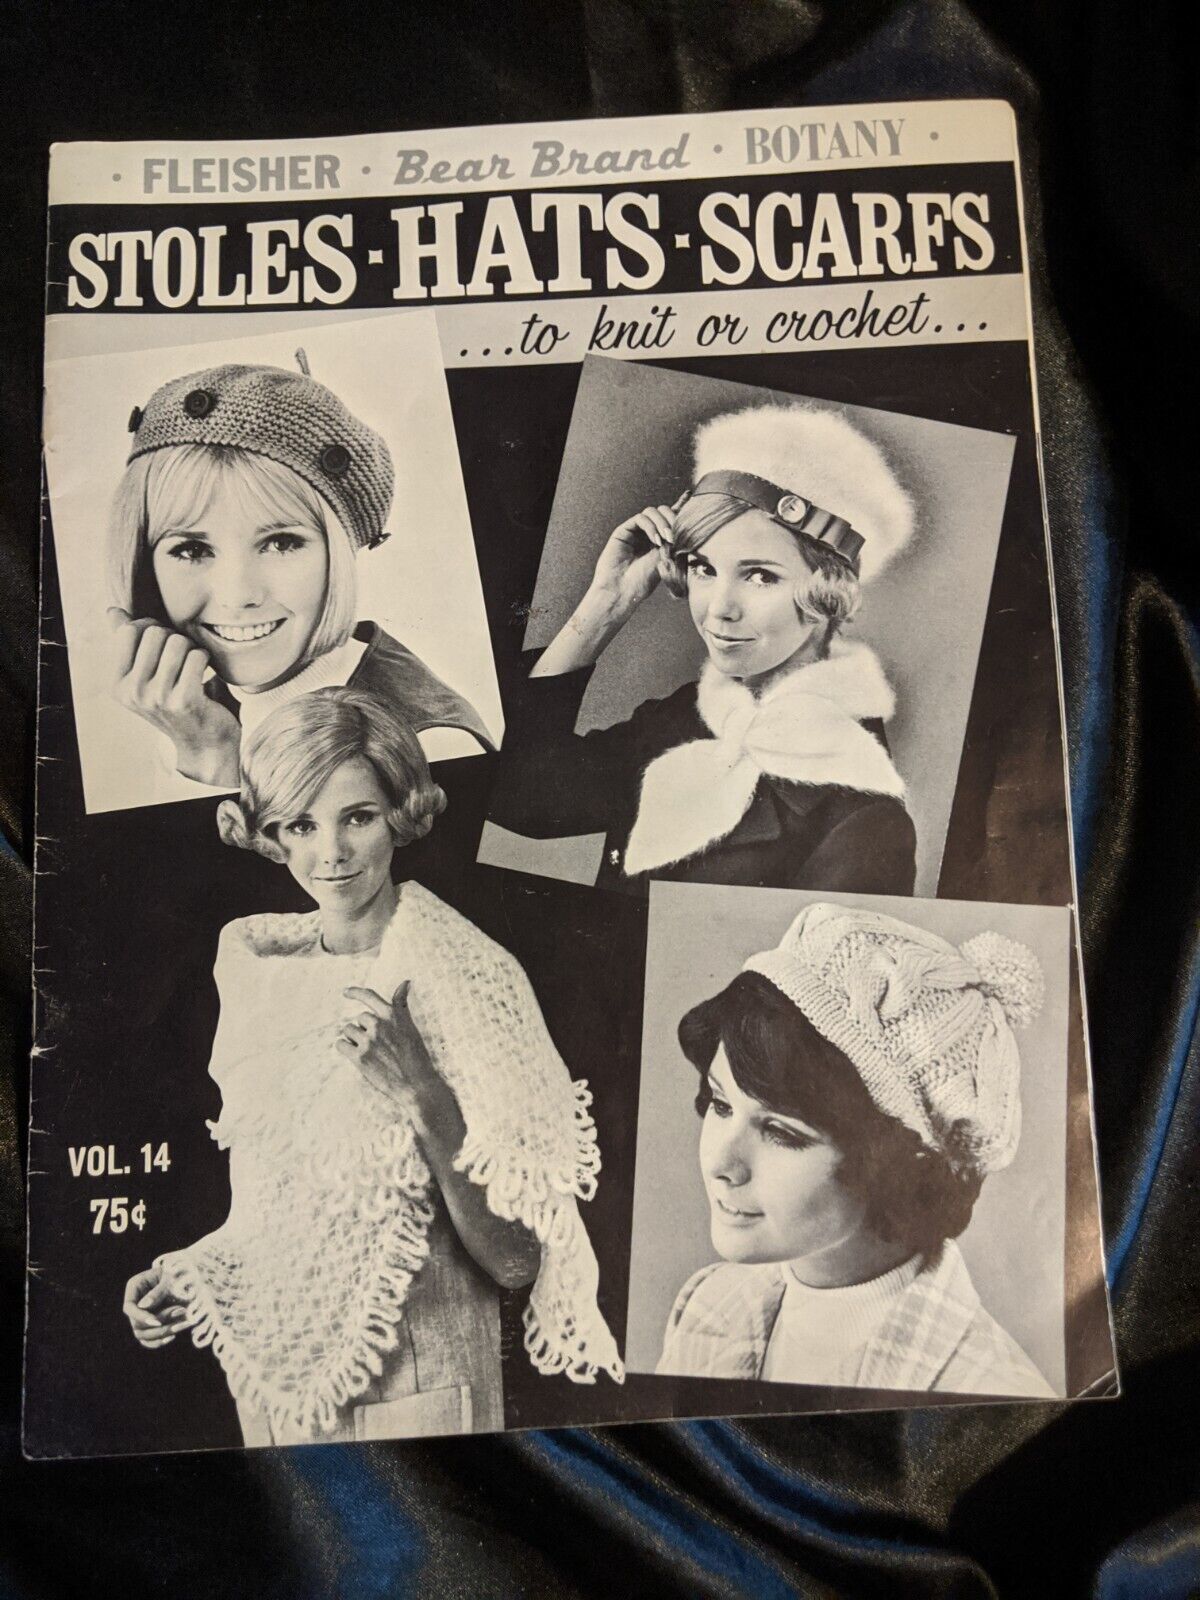 Stoles-Hats-Scarfs to Knit or Crochet Book Vol14,1954 Fleisher-Bear Brand-Botany - £5.43 GBP